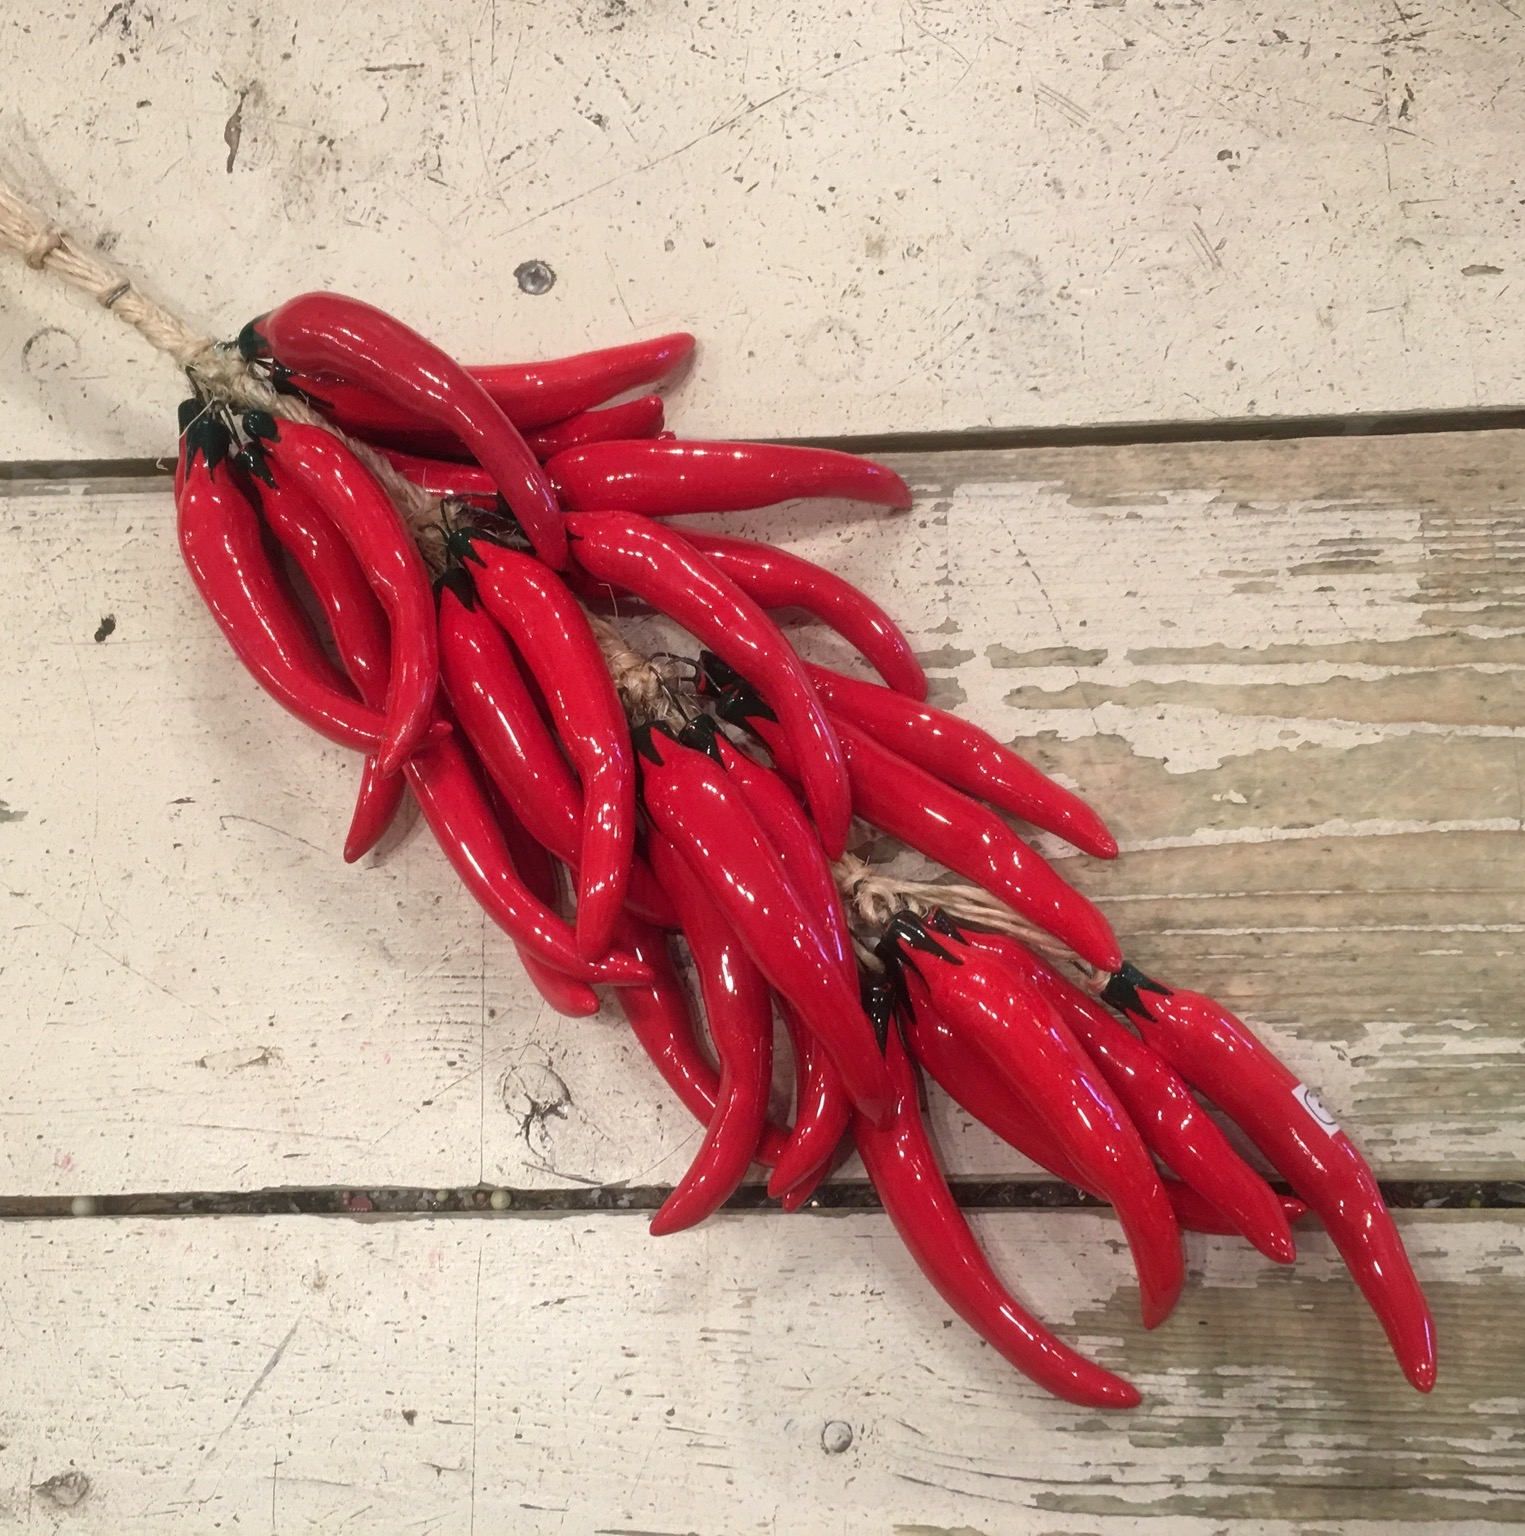 Red Chili Pepper String / Chili Peppers / Hanging Red Chili Peppers ...